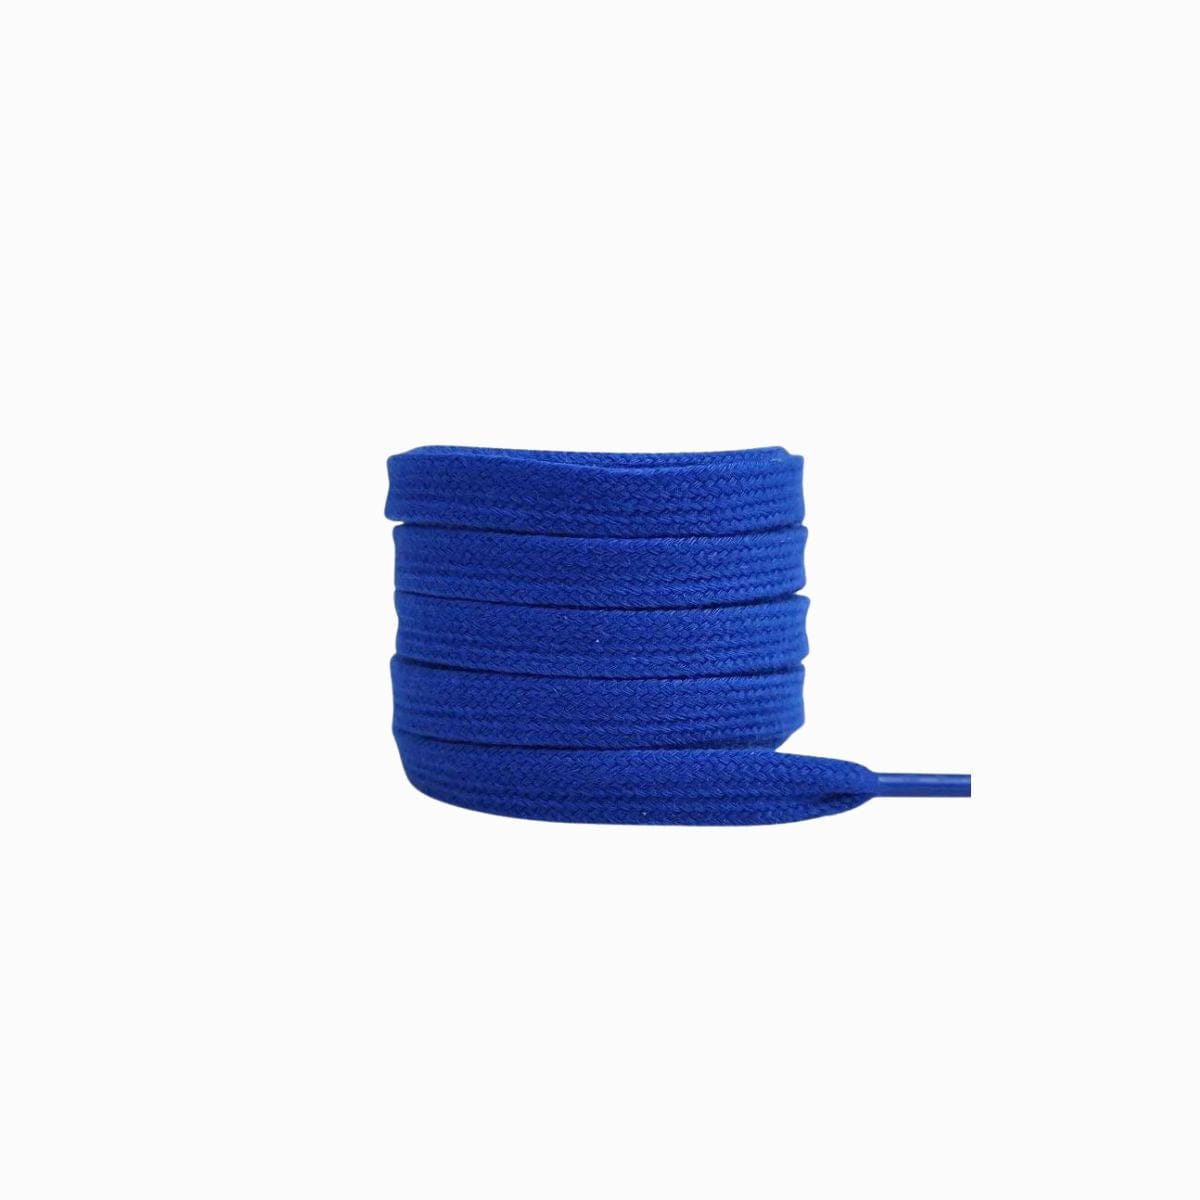 Royal Blue Replacement Converse Laces for Converse Star Player 76 Sneakers by Kicks Shoelaces